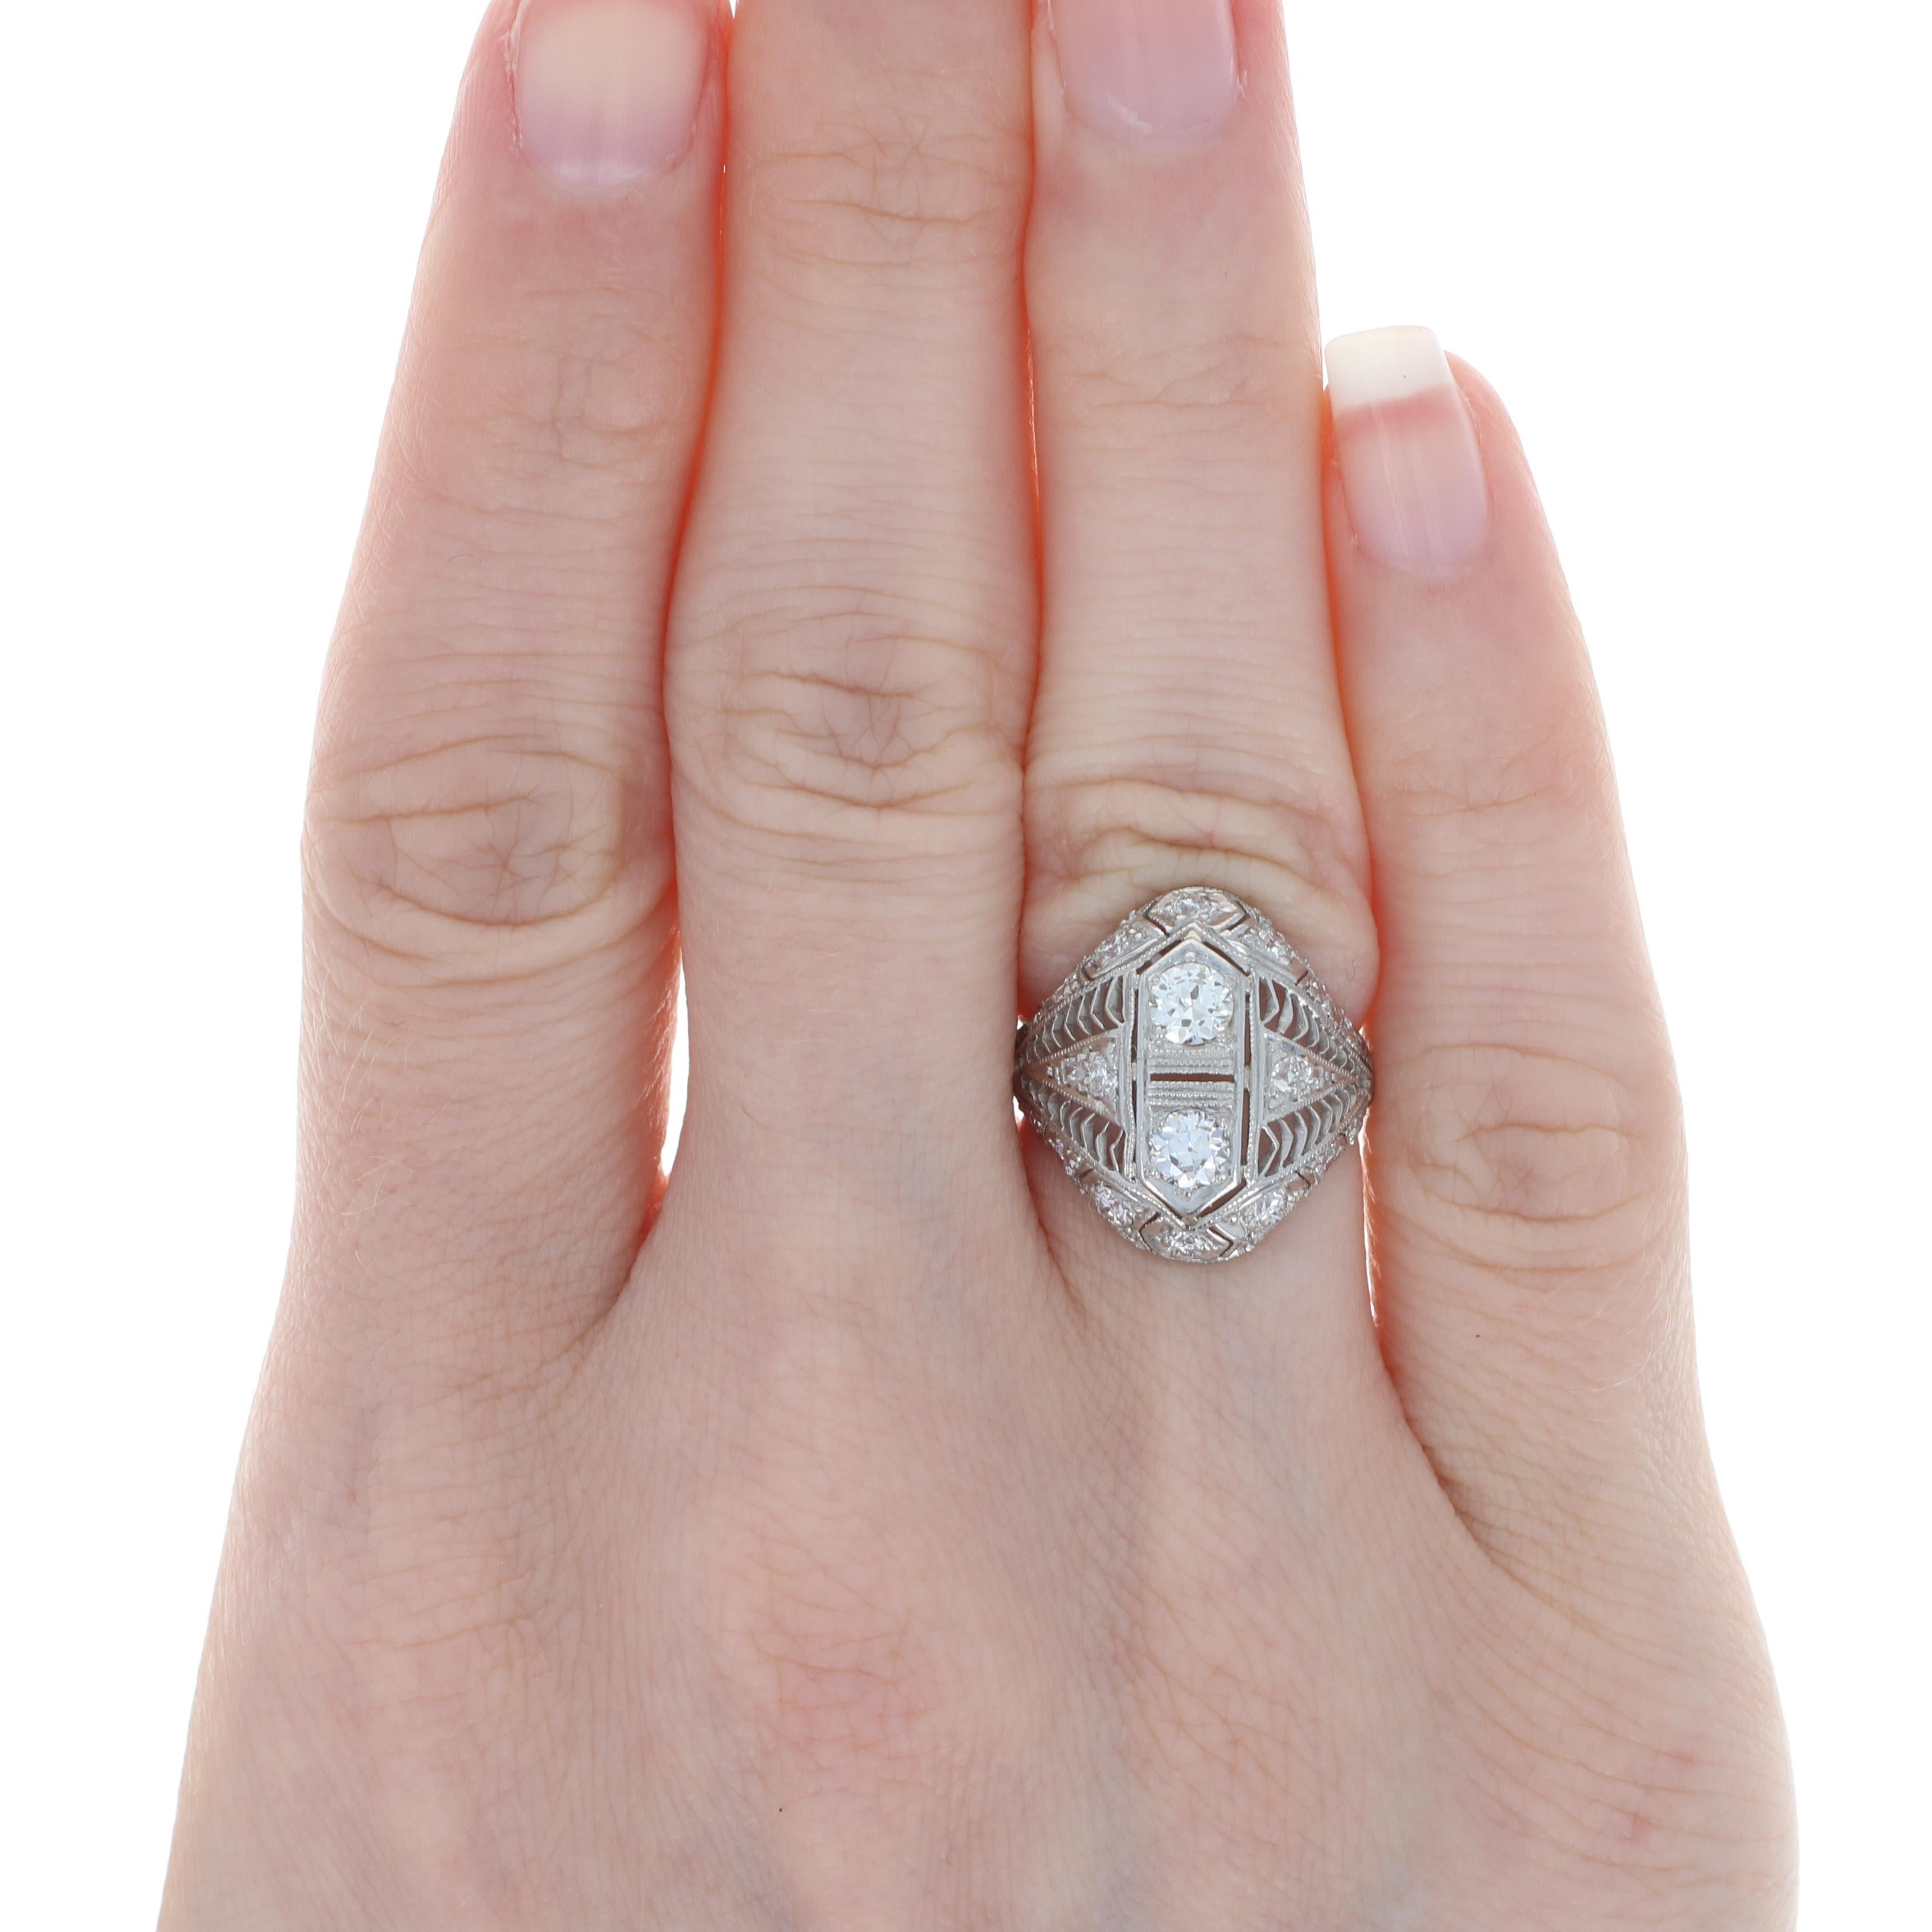 Art Deco allure! Exquisitely crafted in platinum, this glamorous vintage ring showcases an ornate filigree design featuring two European cut diamonds sweetly accompanied by a shimmering array of European cut and single cut accent diamonds. 

This